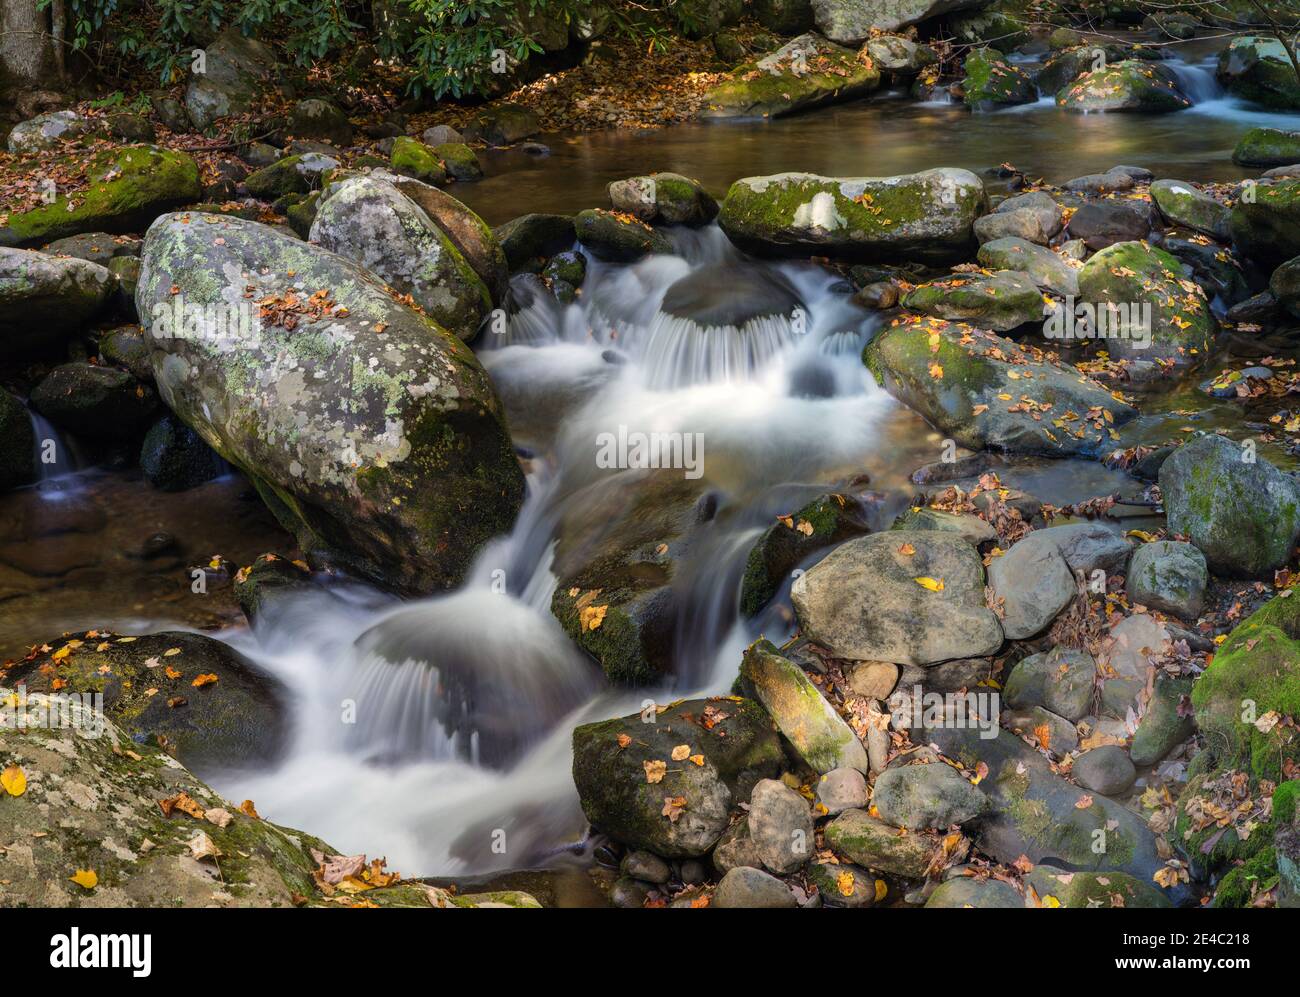 Stream flowing through rocks in a forest, Roaring Fork Motor Nature Trail, Great Smoky Mountains National Park, Tennessee, USA Stock Photo